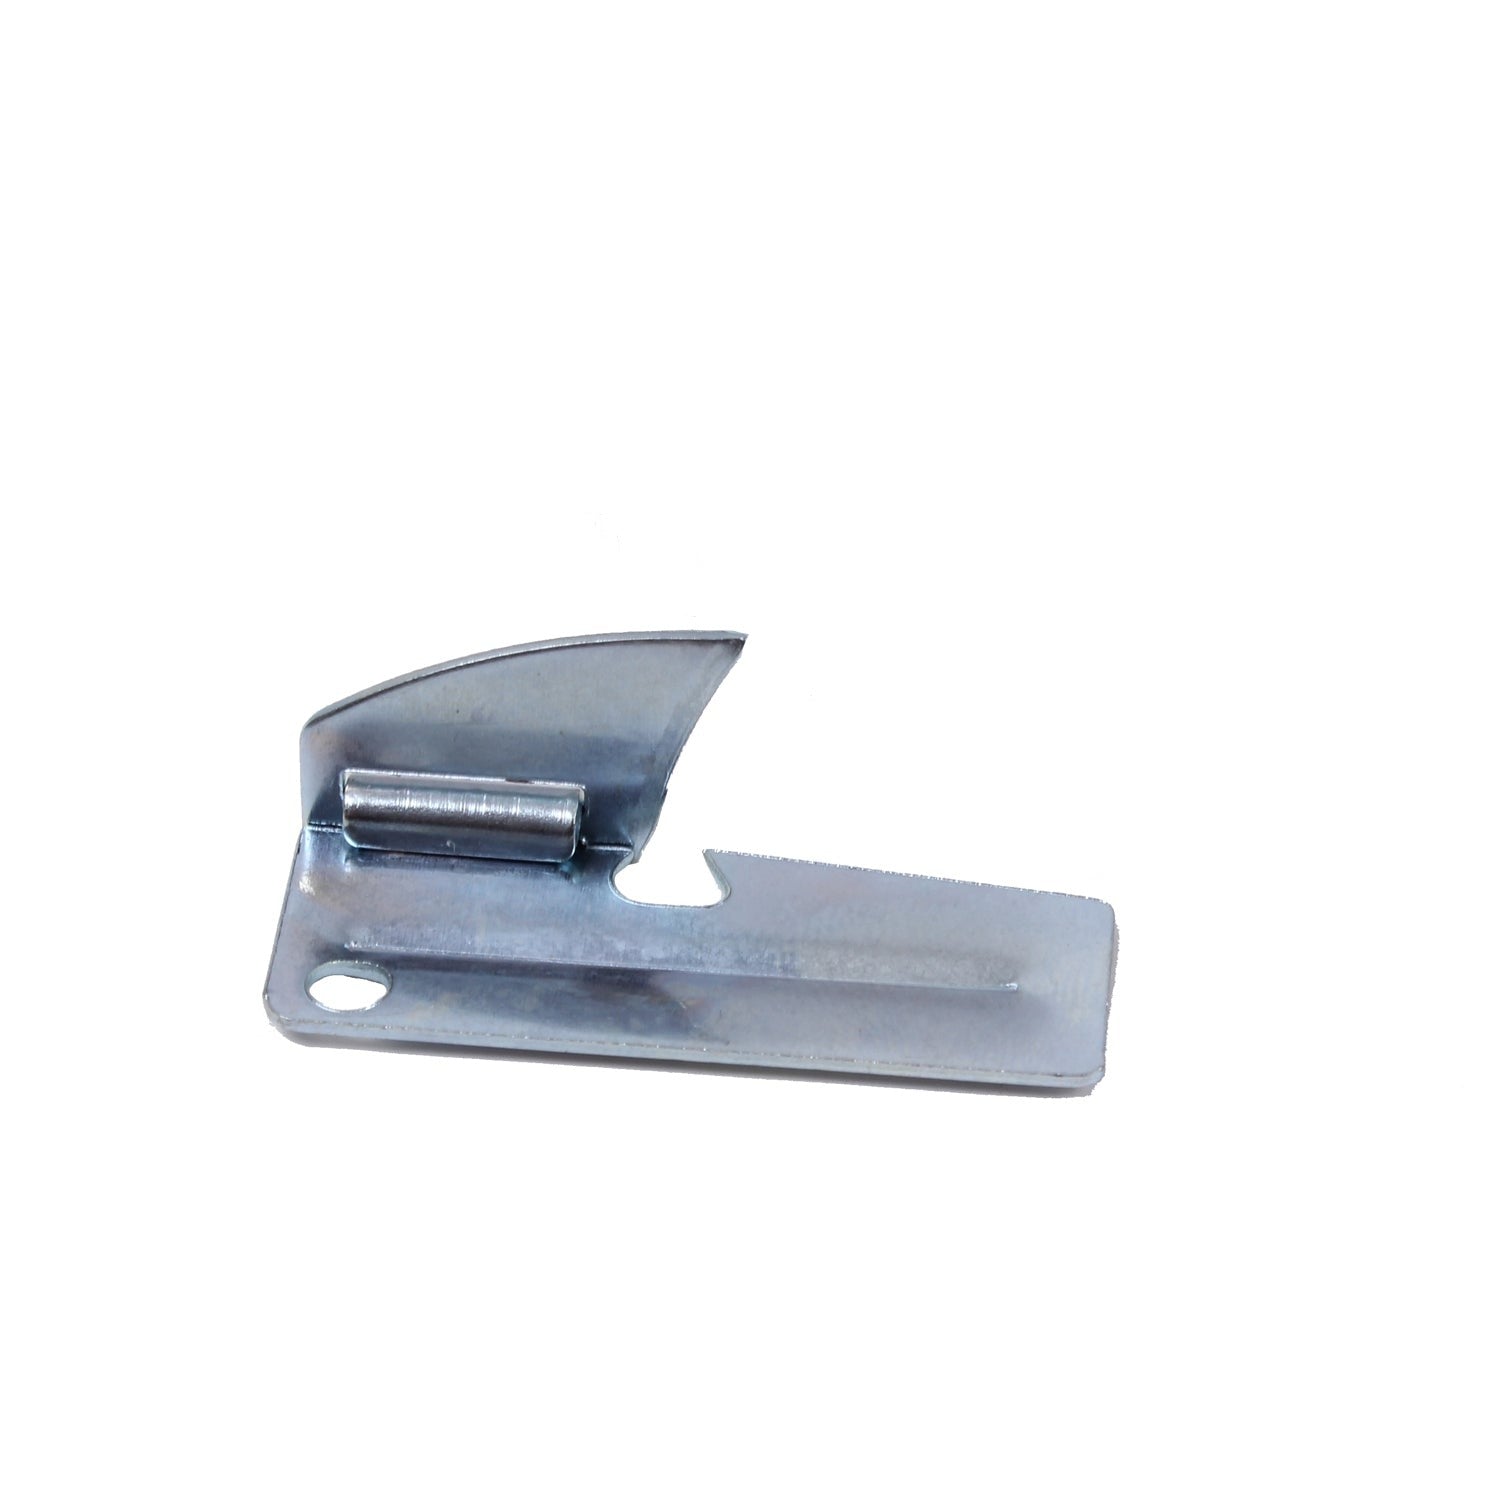 P38 Pocket Can Opener, qty 2